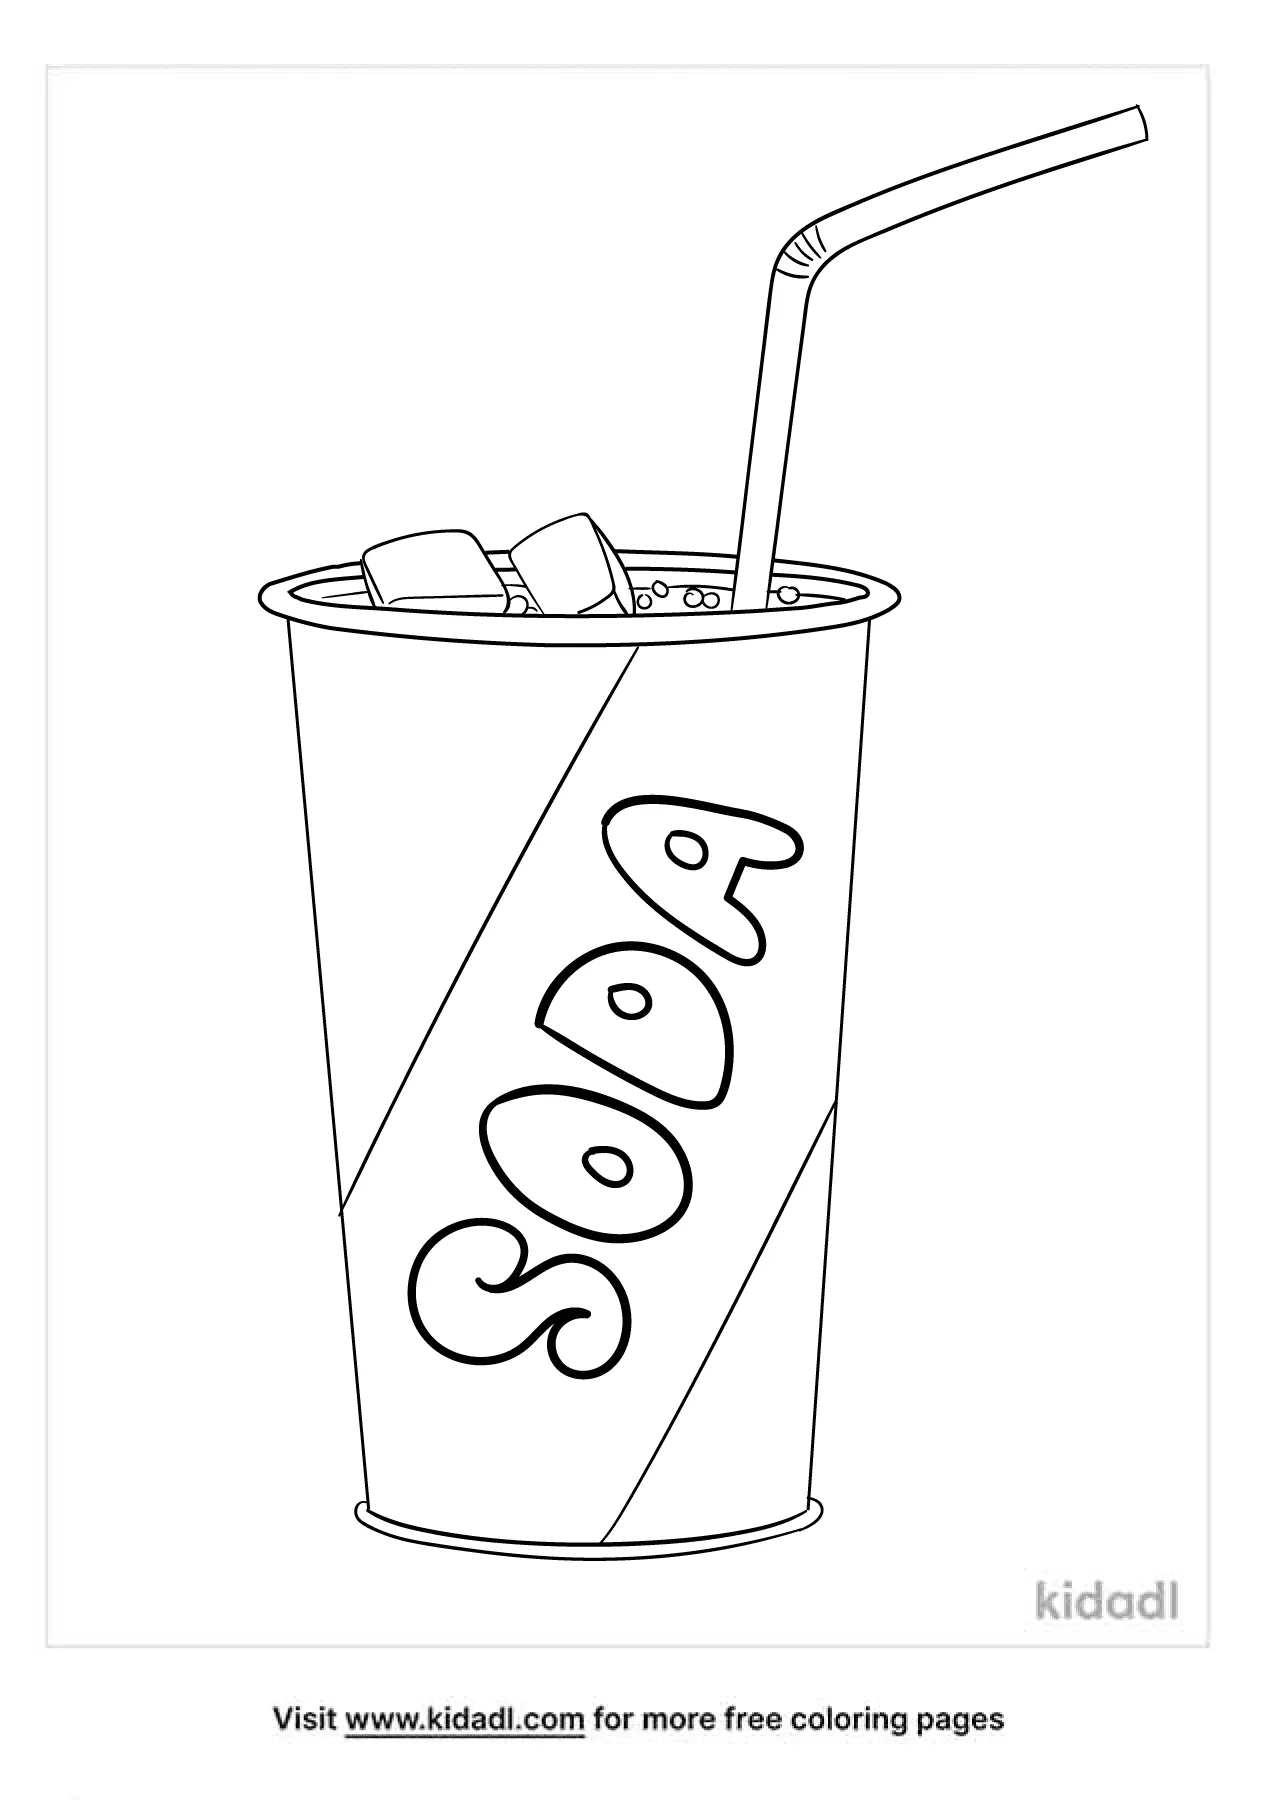 Free soda coloring page coloring page printables